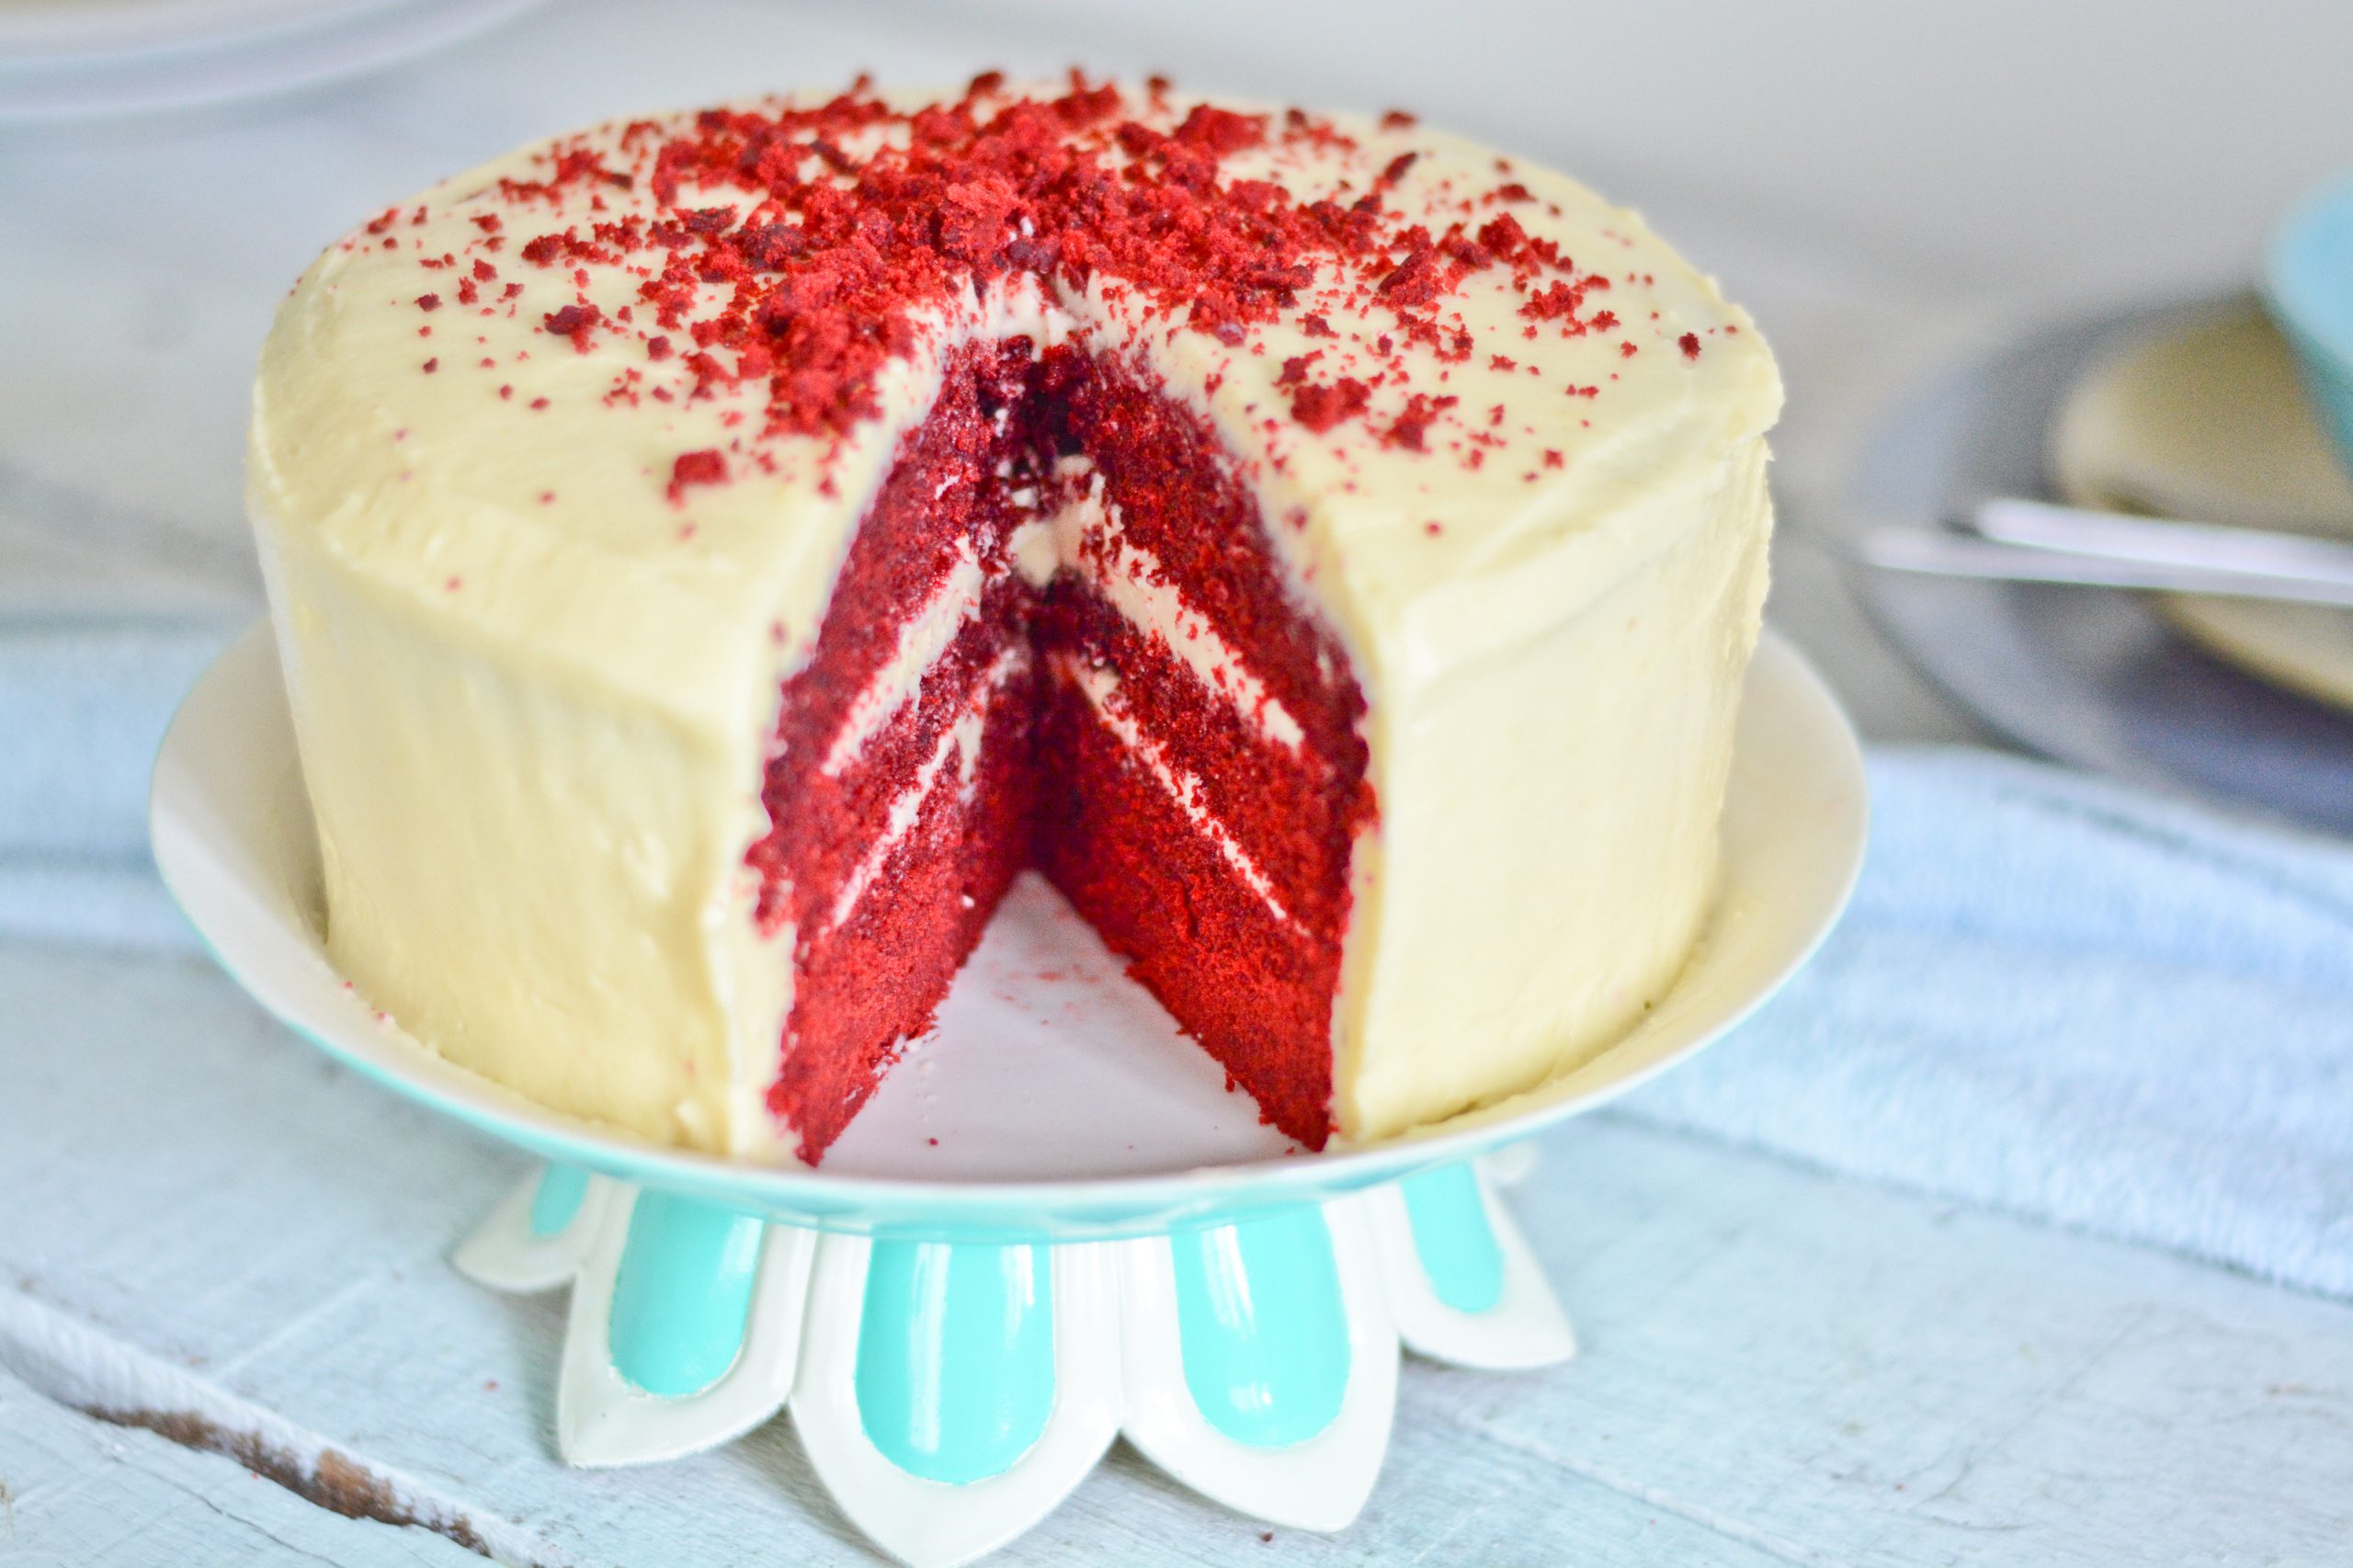 How to Make Red Velvet Cake (with Pictures)